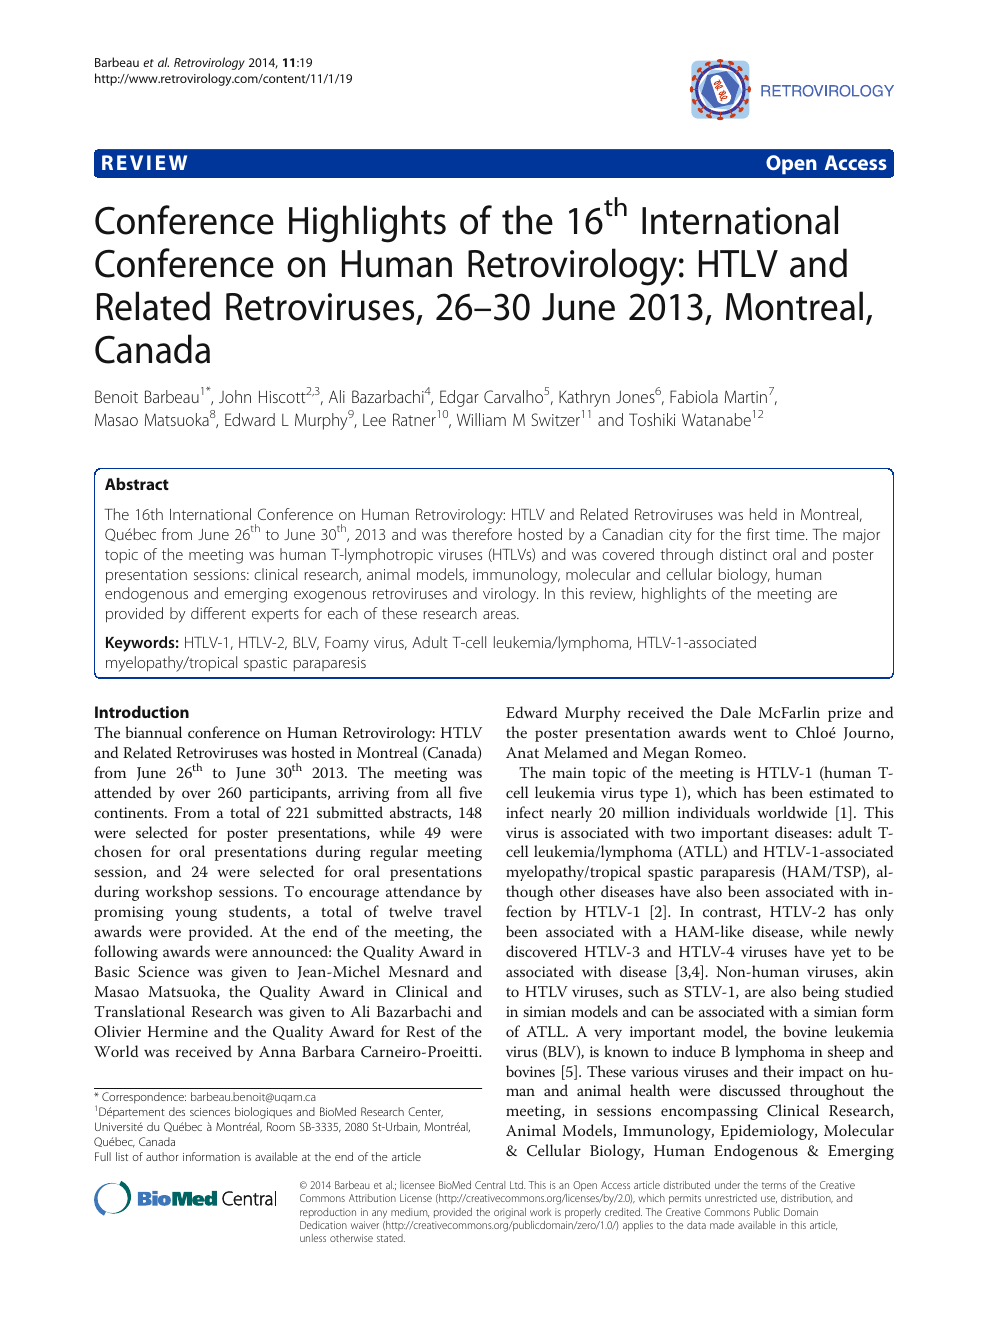 Conference Highlights Of The 16th International Conference On Human Retrovirology Htlv And Related Retroviruses 26 30 June 13 Montreal Canada Topic Of Research Paper In Biological Sciences Download Scholarly Article Pdf And